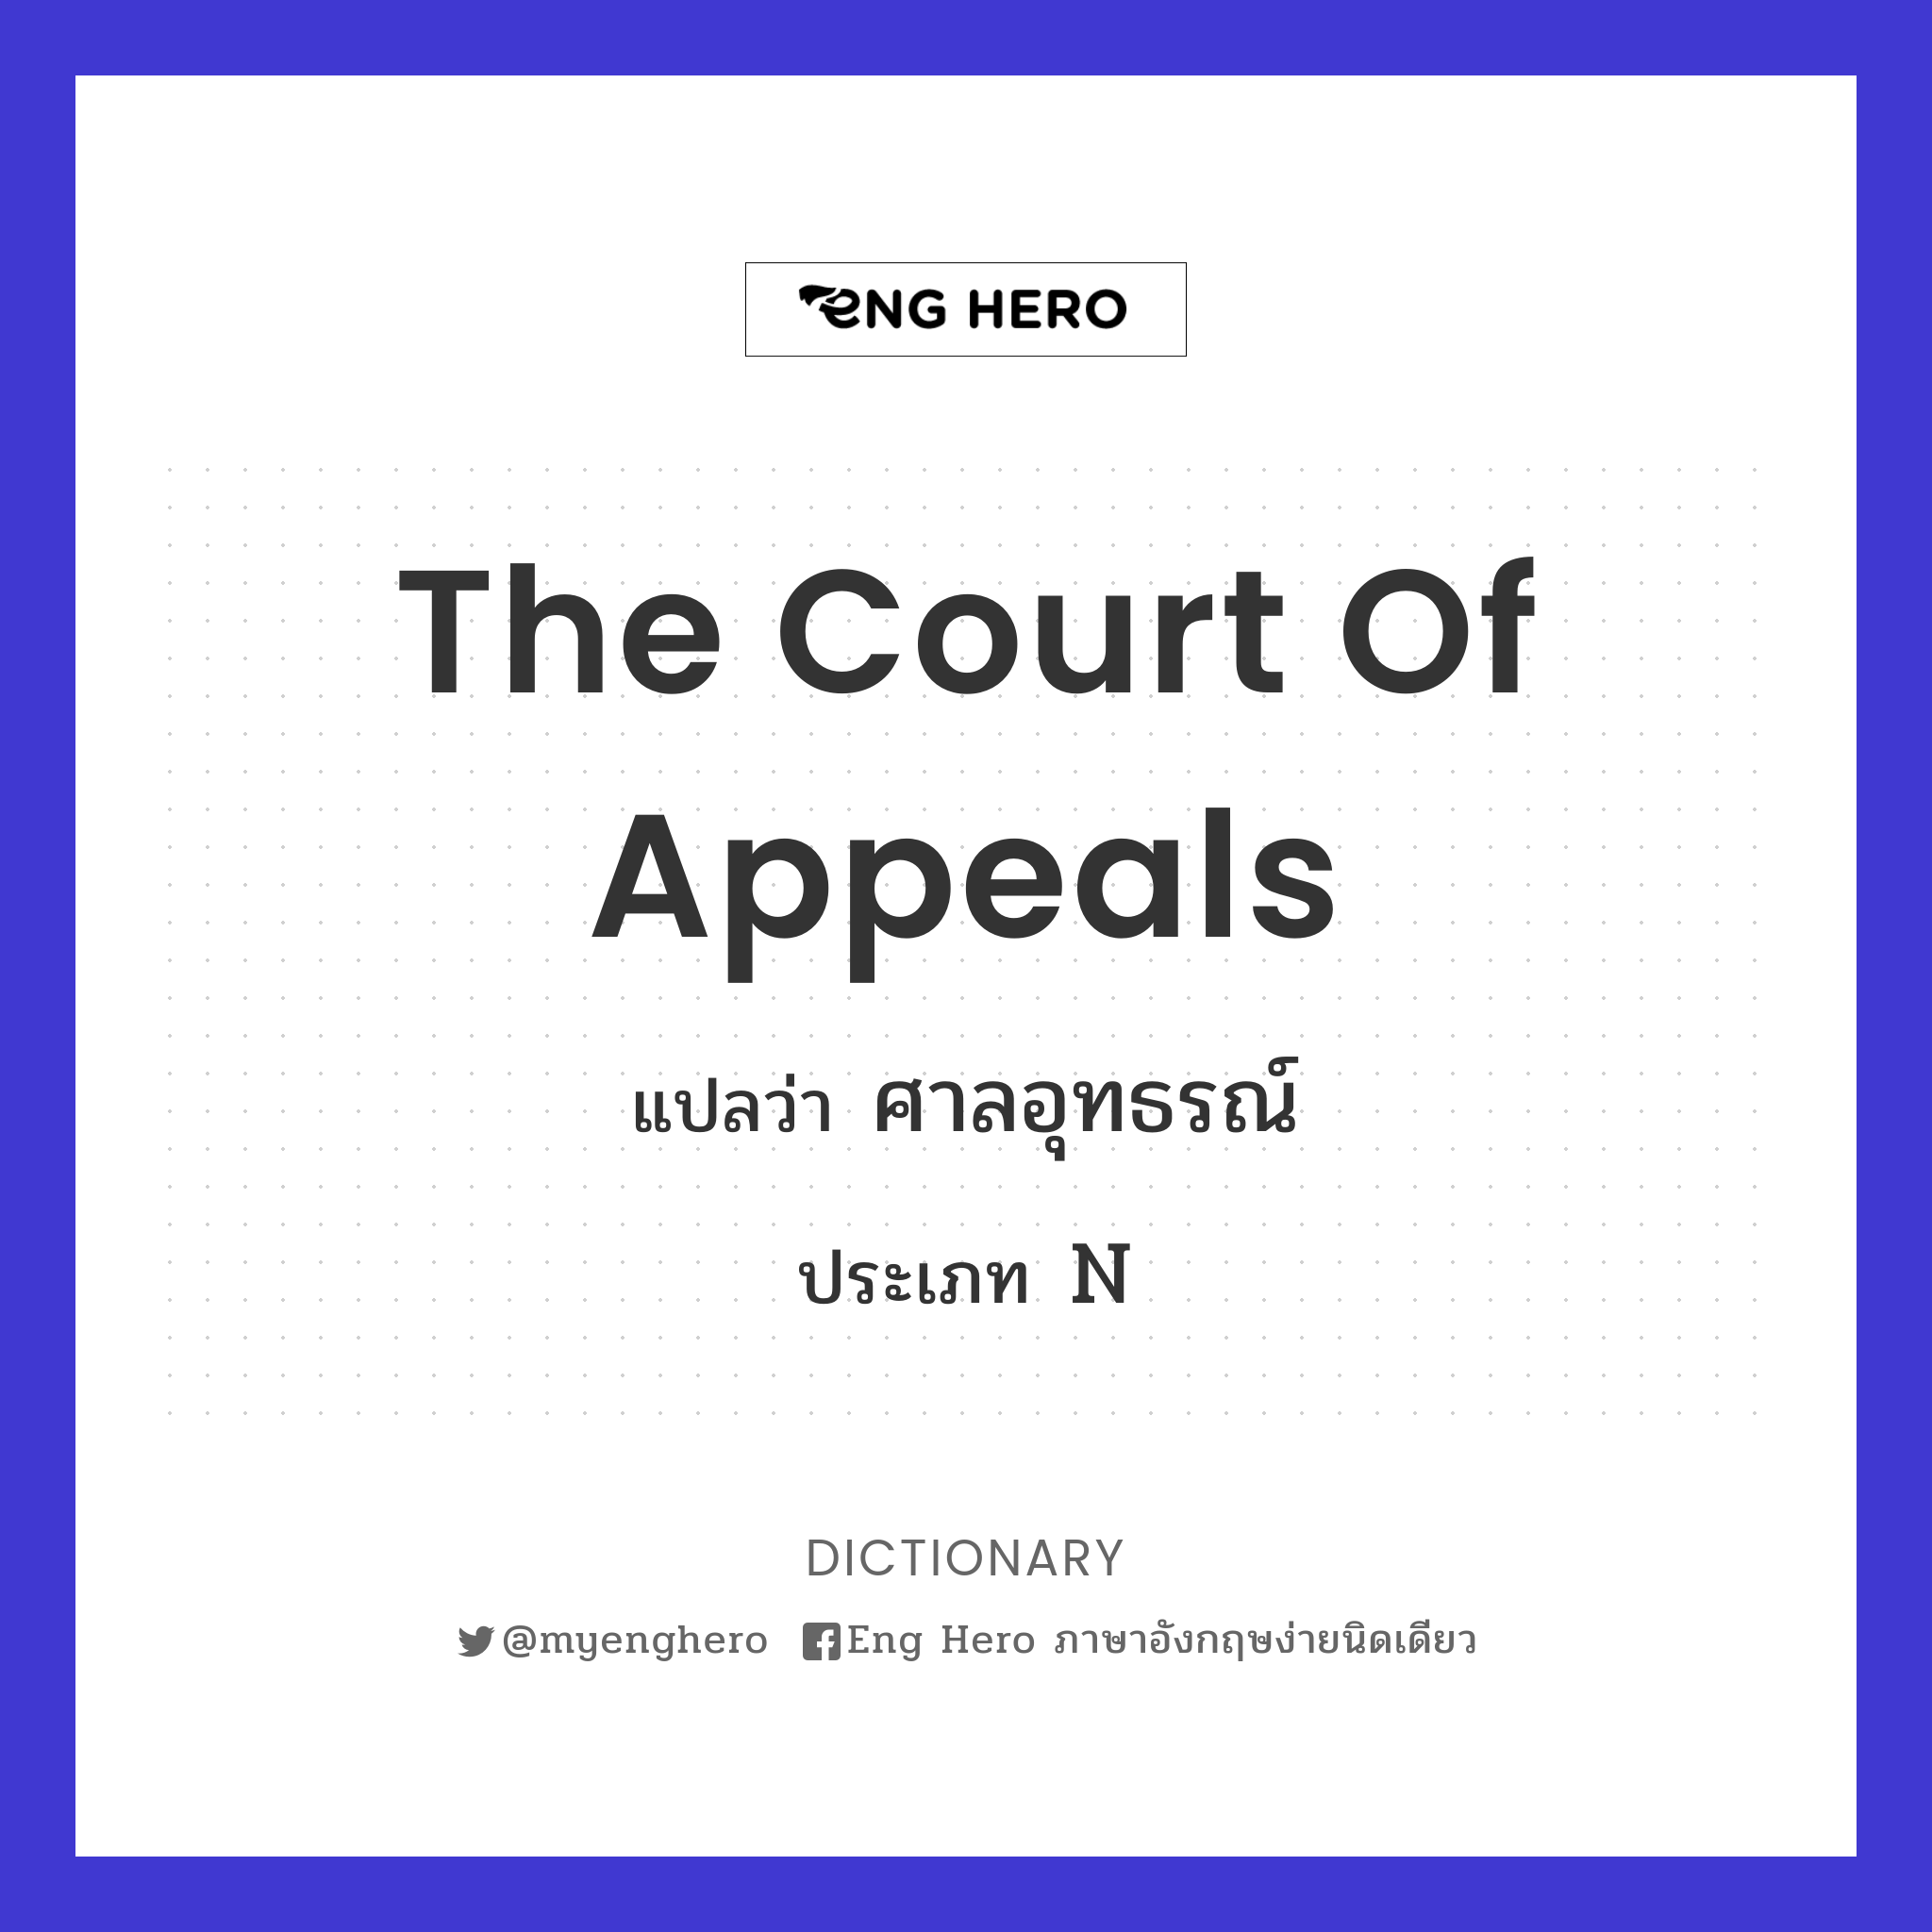 The Court of Appeals